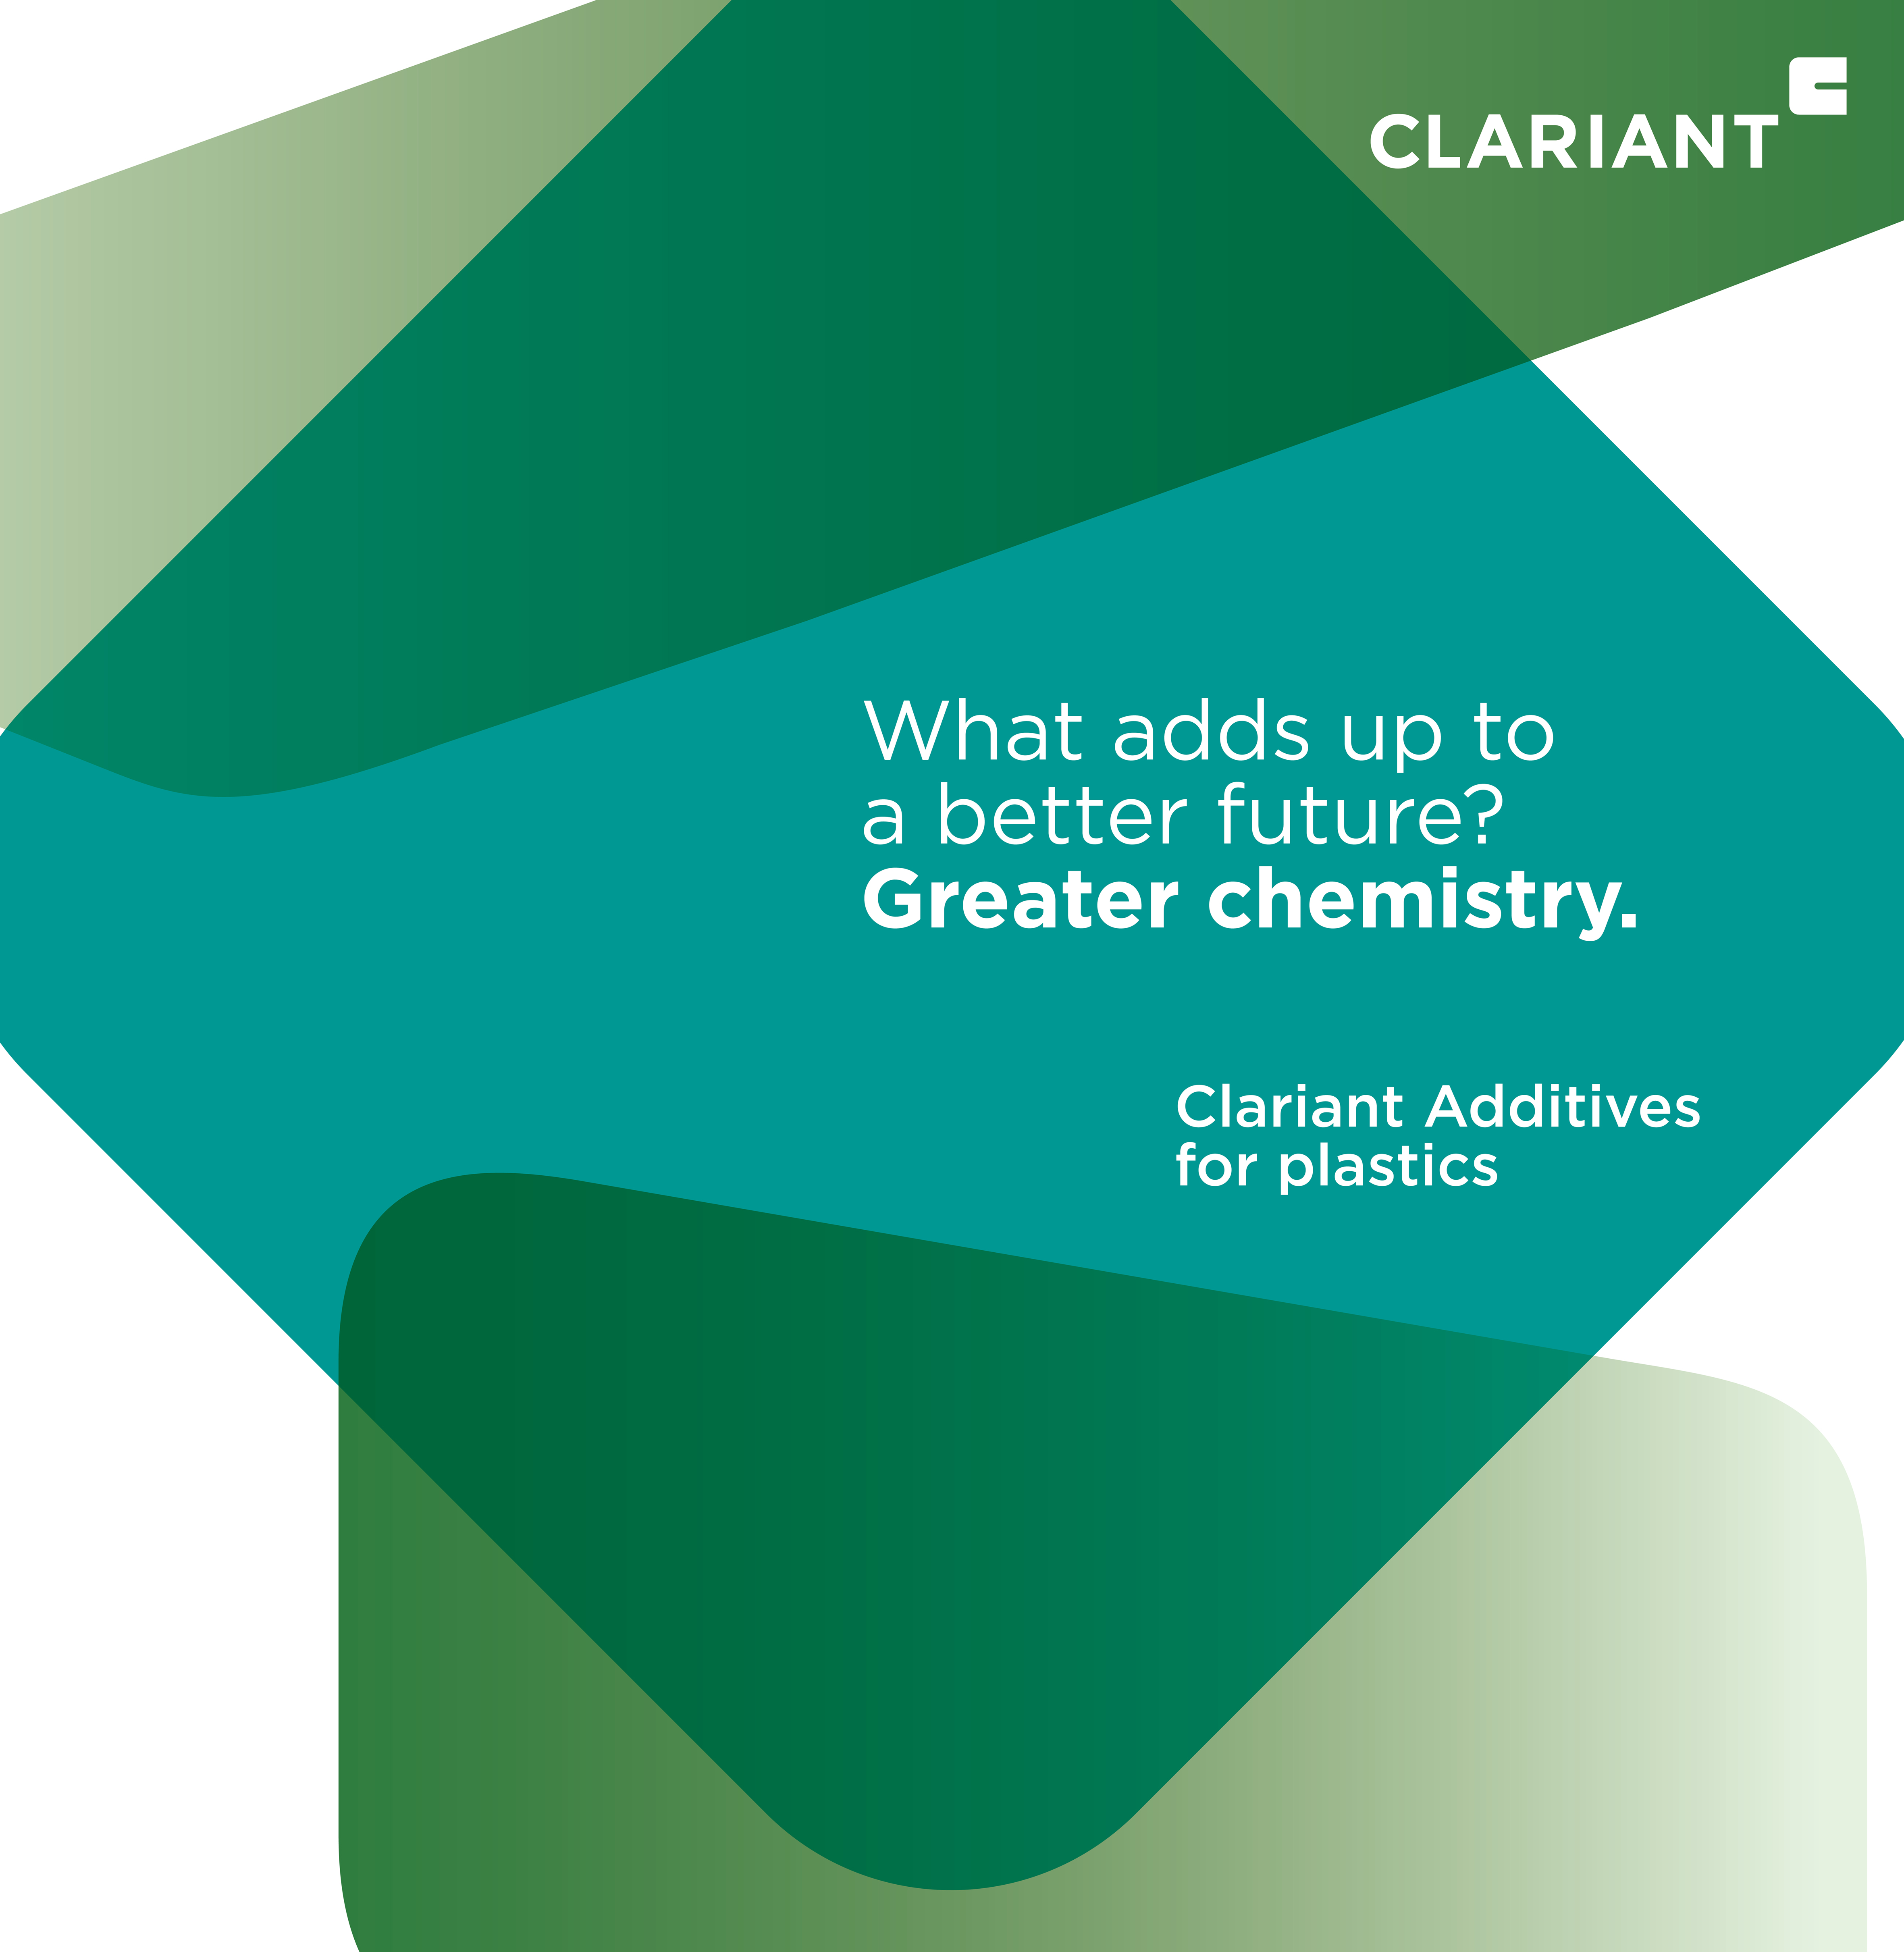 Clariant additives add up to a better future for plastic at Chinaplas 2023 exhibition.